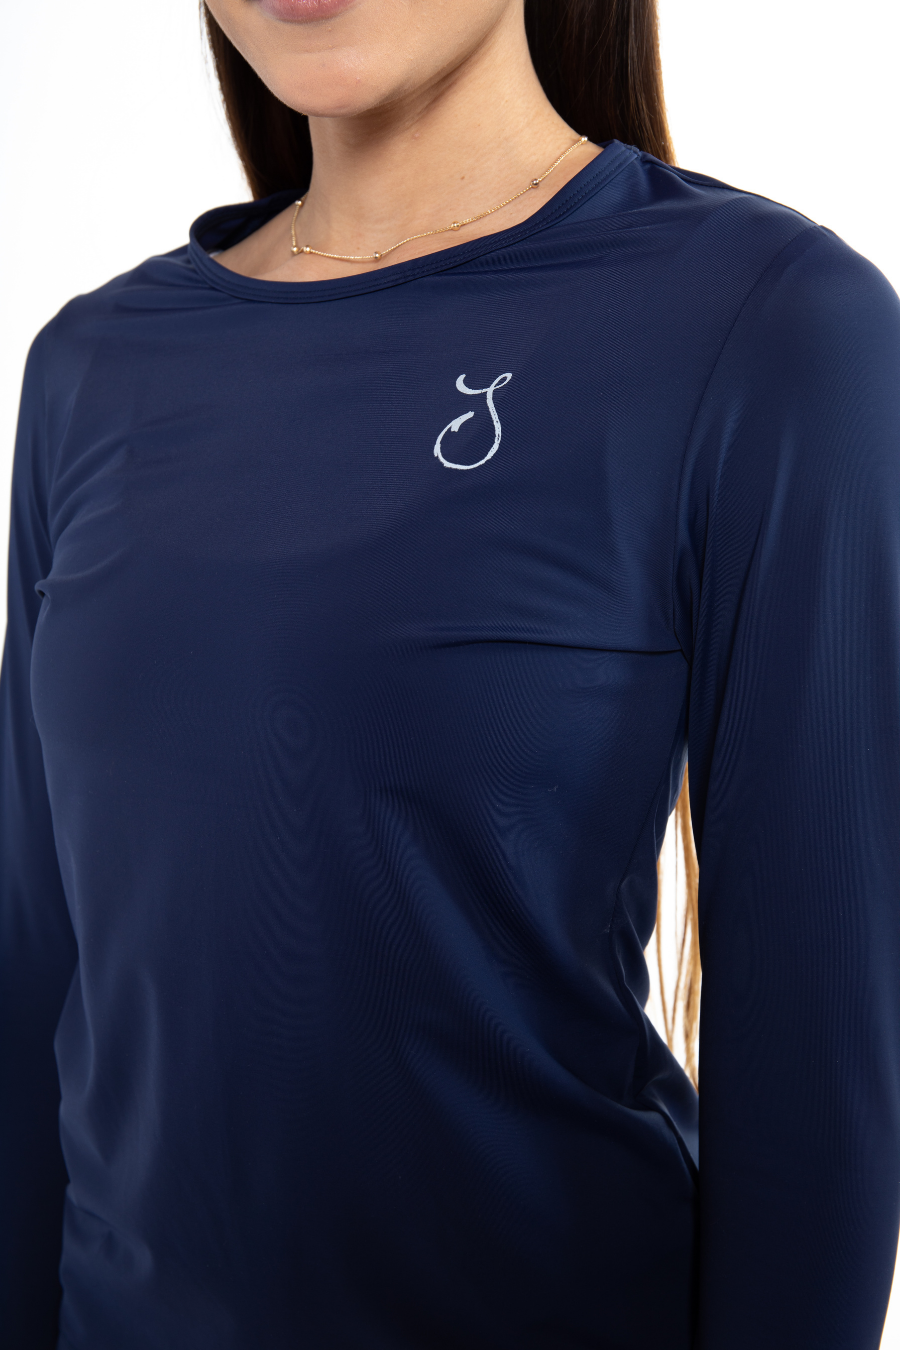 Classic Performance Top - Navy Blue